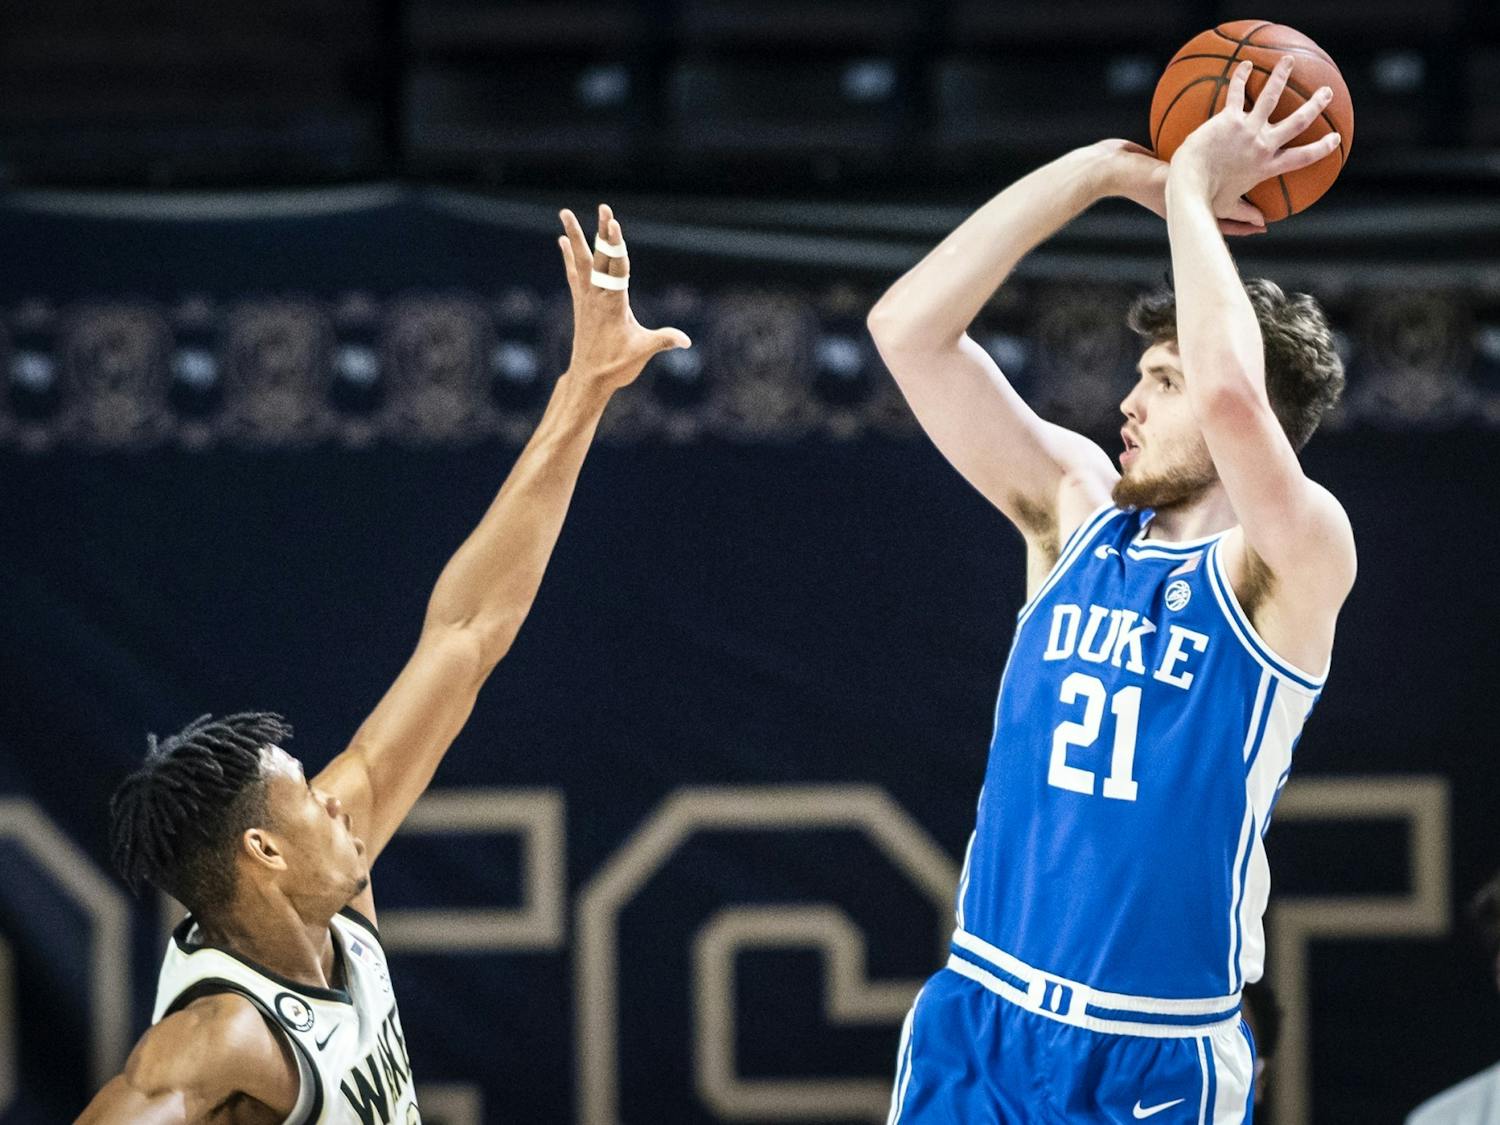 Matthew Hurt increased his points per game from 9.7 to 18.3 between his freshman and sophomore seasons. 